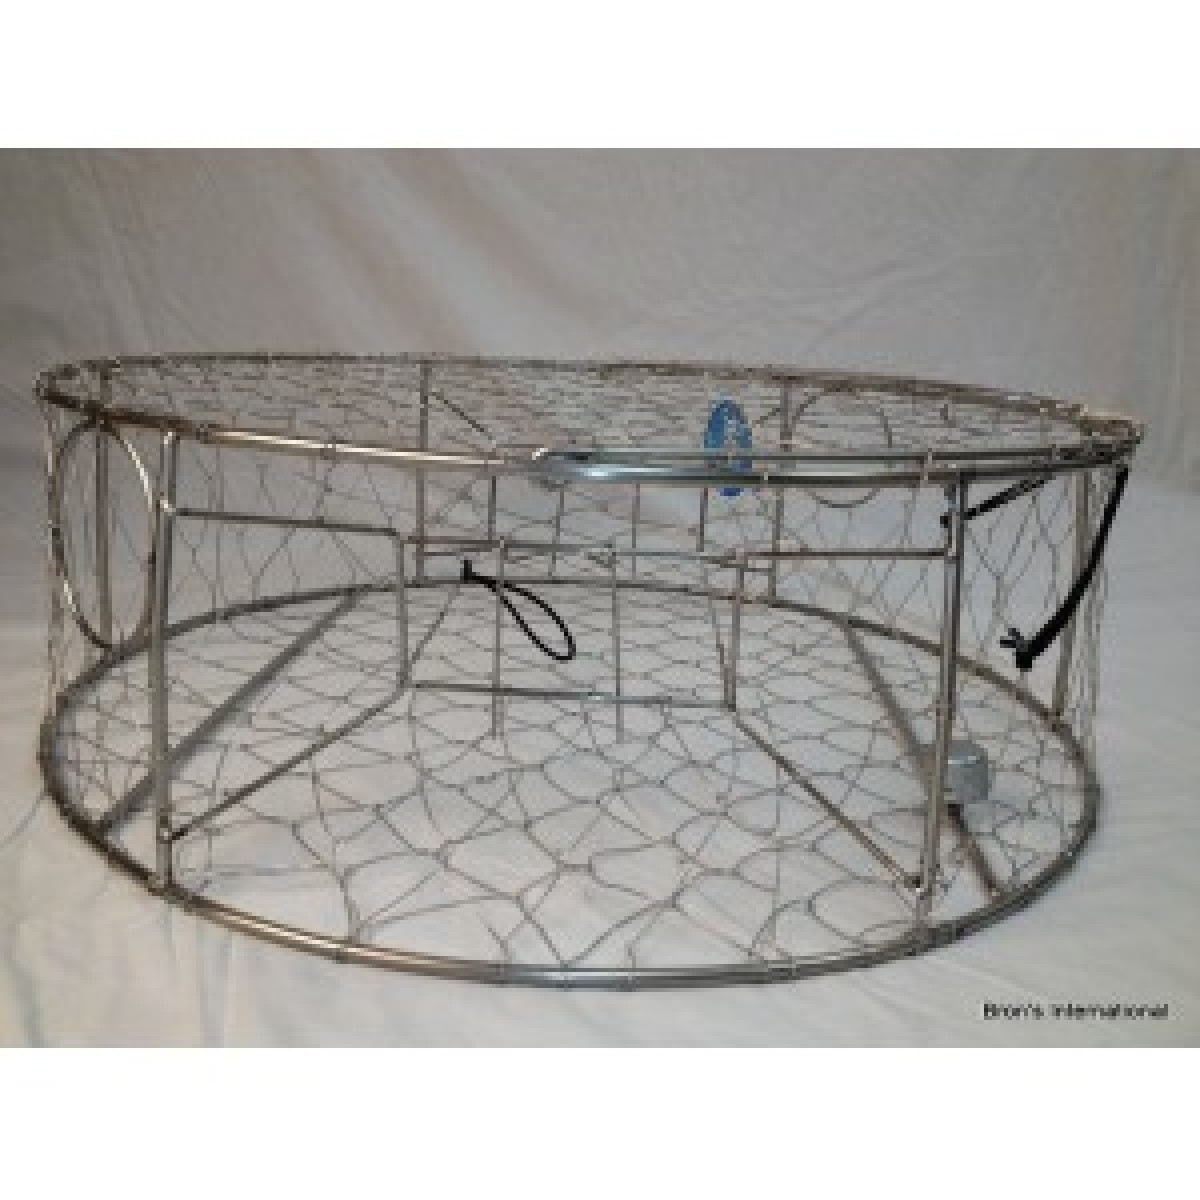 Pacitic Stainless Steel 30 Commercial Crab Trap - CT008 - CT008 |Steveston  Marine Canada